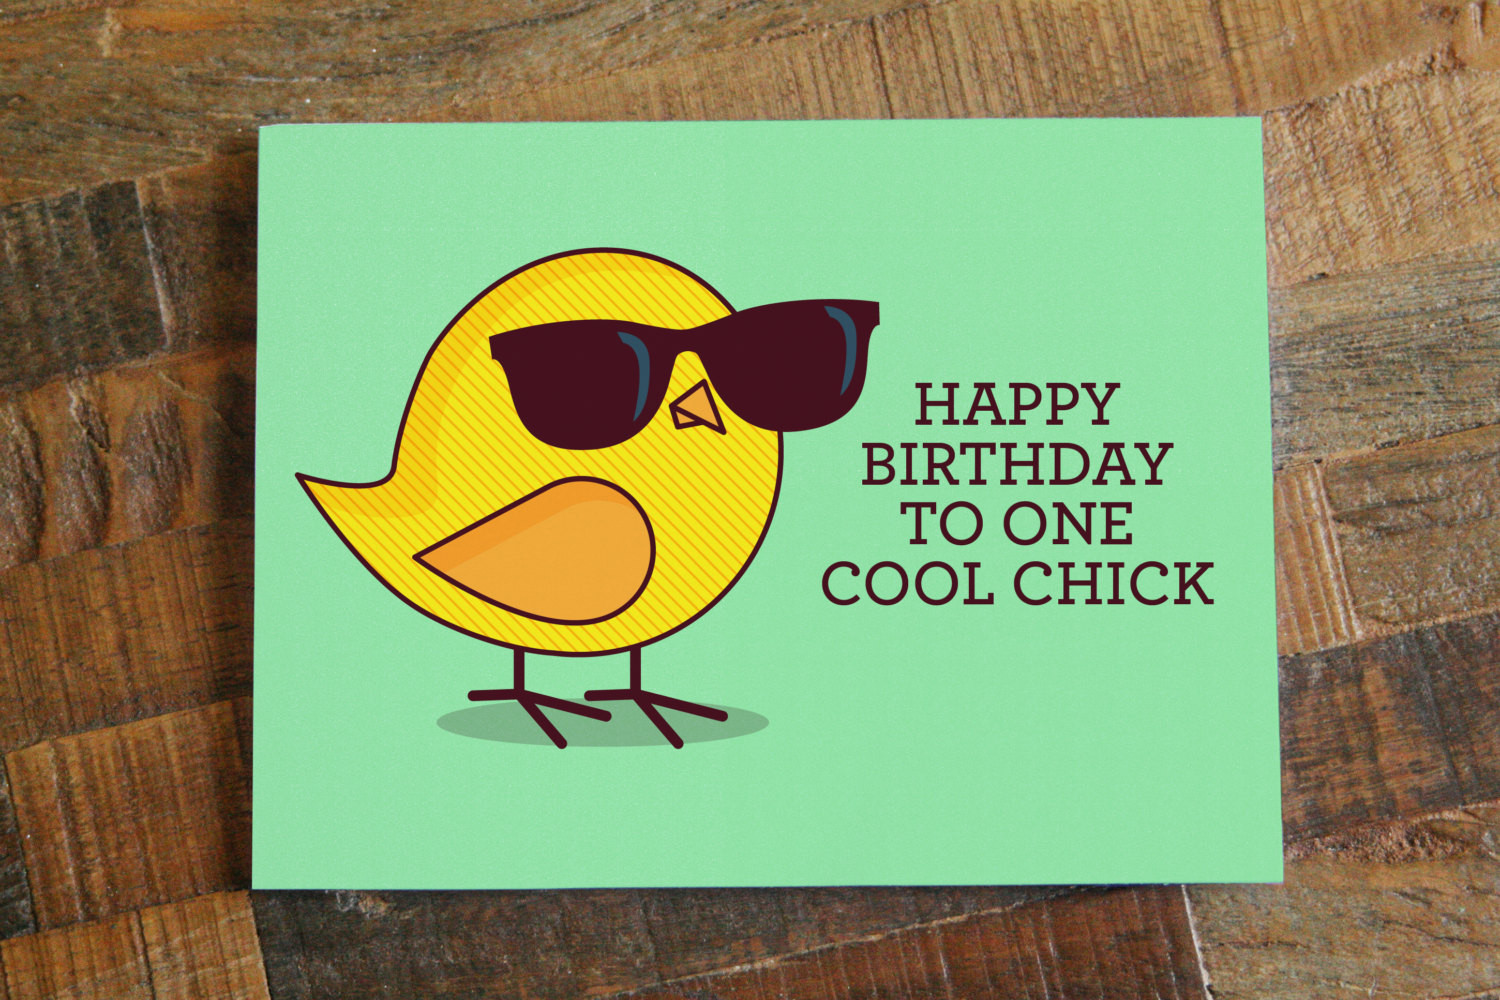 Happy Birthday Cards For Him Funny
 Funny Birthday Card For Her "Happy Birthday to e Cool